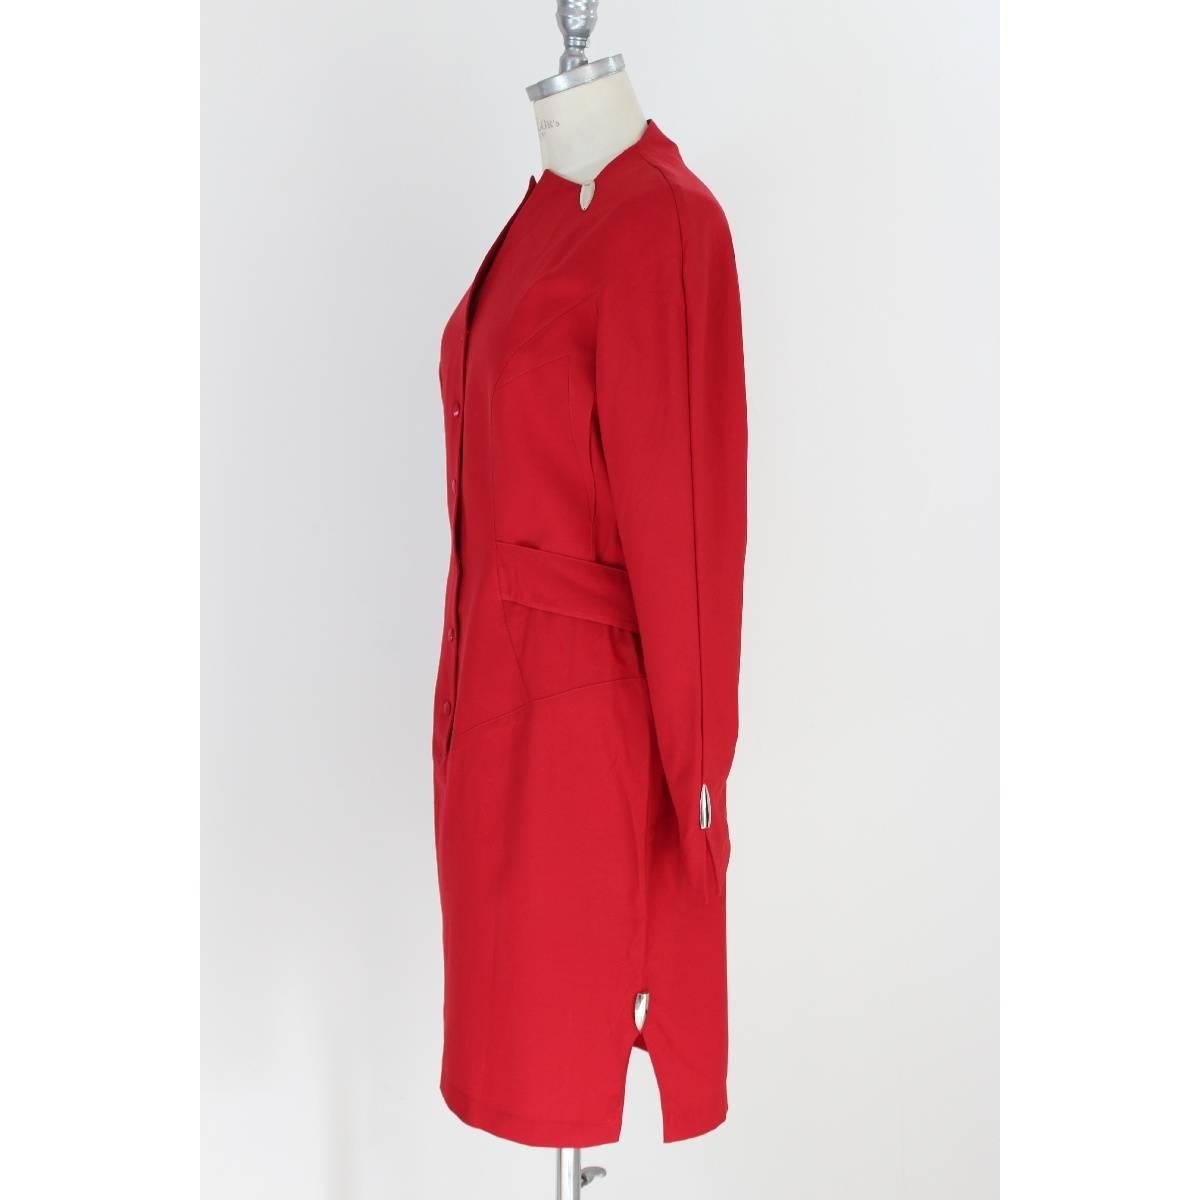 Thierry Mugler Paris 100% wool red vintage dress , the dress closes along the chest with clips, pencil skirt, the sleeves are wide at the end, on the neck and at the end of the sleeves there are steel inserts, there is a belt on the shoulder,